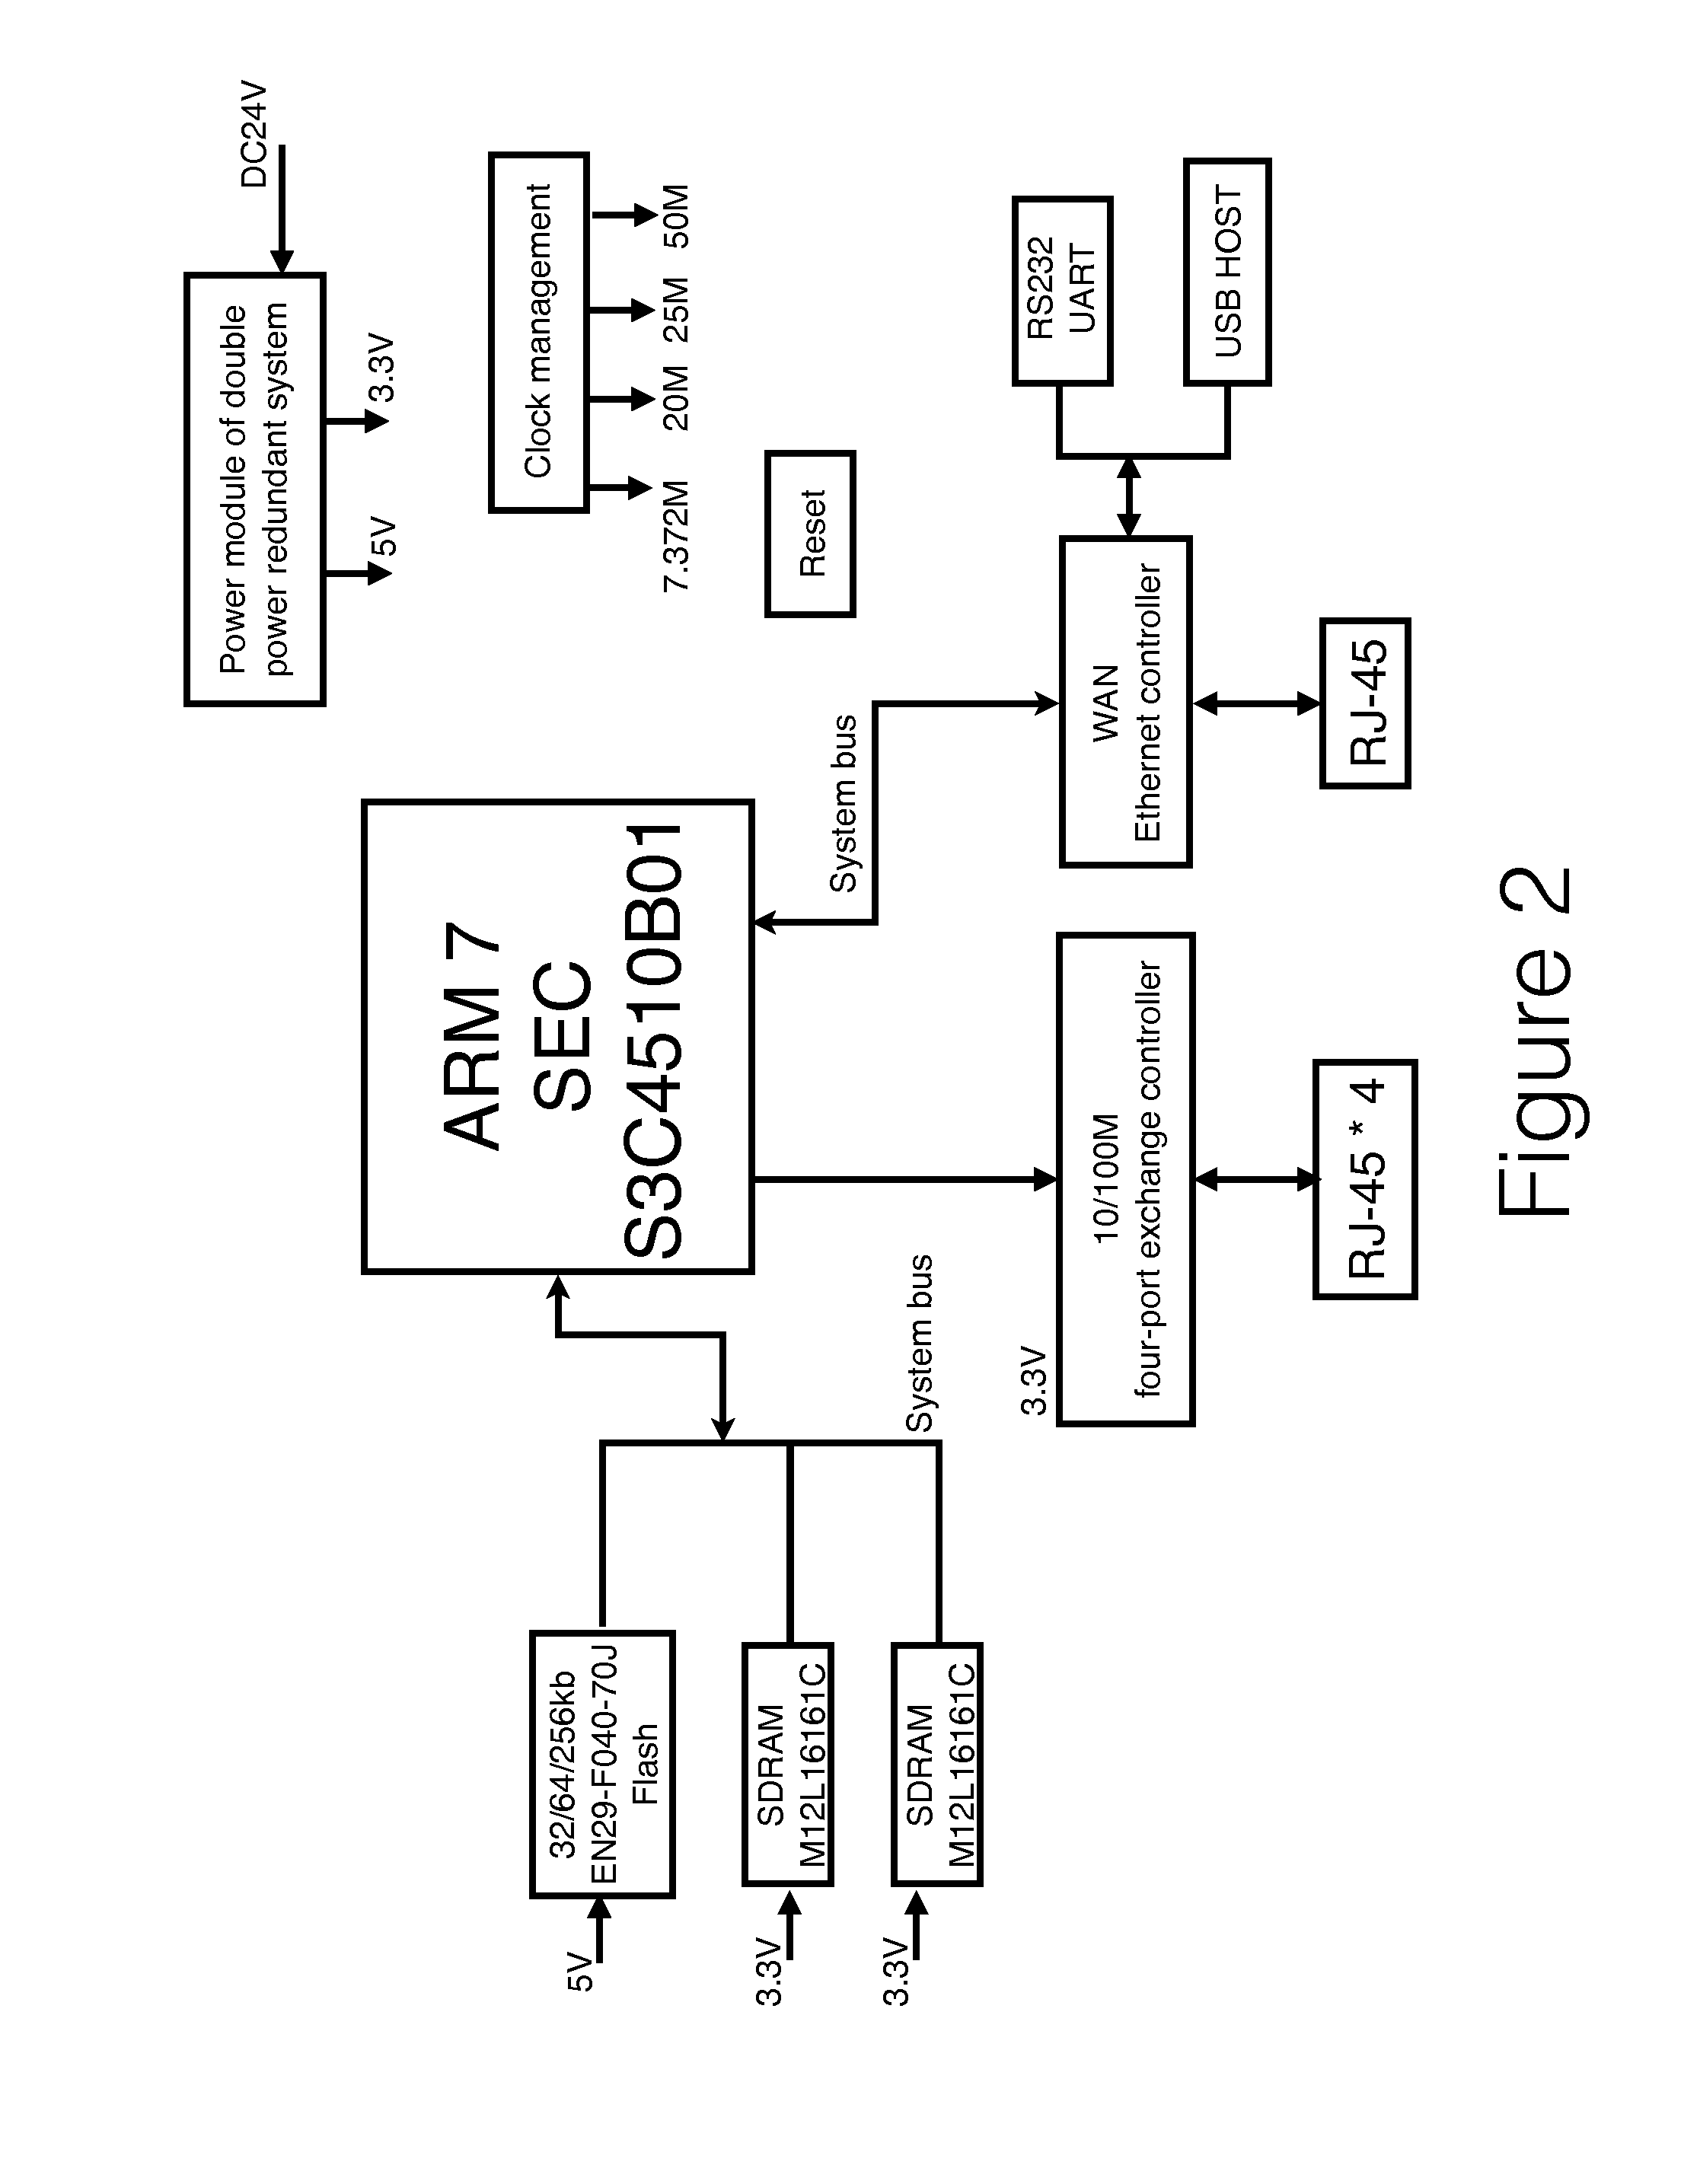 Remote Wireless Communication Control System for Submerged Arc Furnace Reactive Compensation